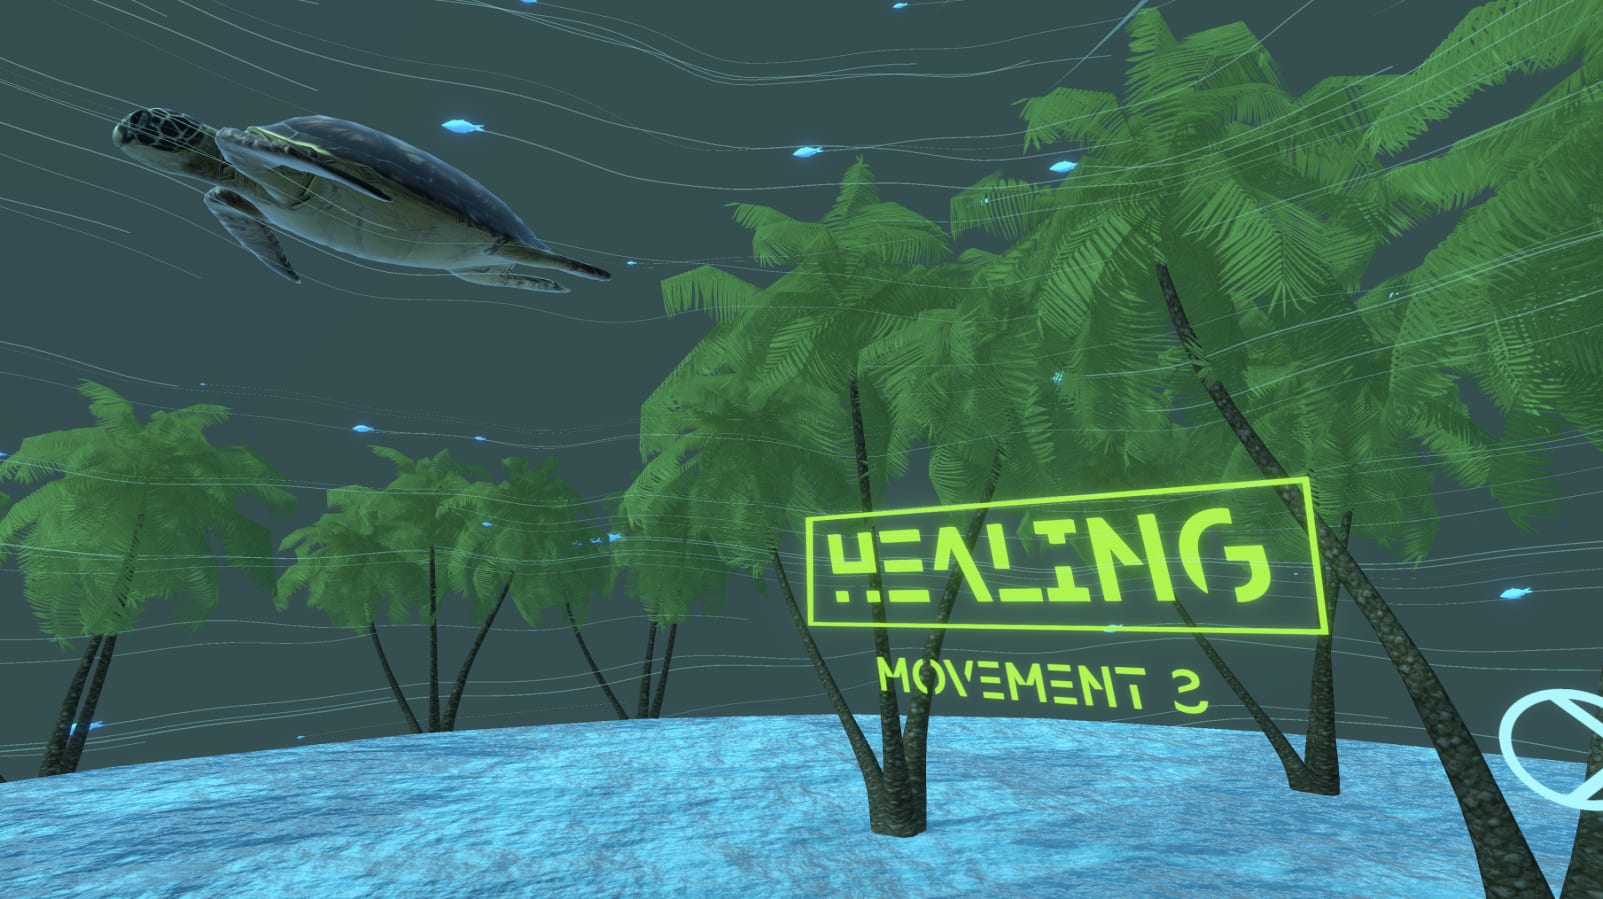 Digital image. Along the floor, bright blue water ripples. Luscious trees grow out from the water, surrounding a yellow neon text that reads Healing Movement 3. To the left of the trees, a turtle floats past.